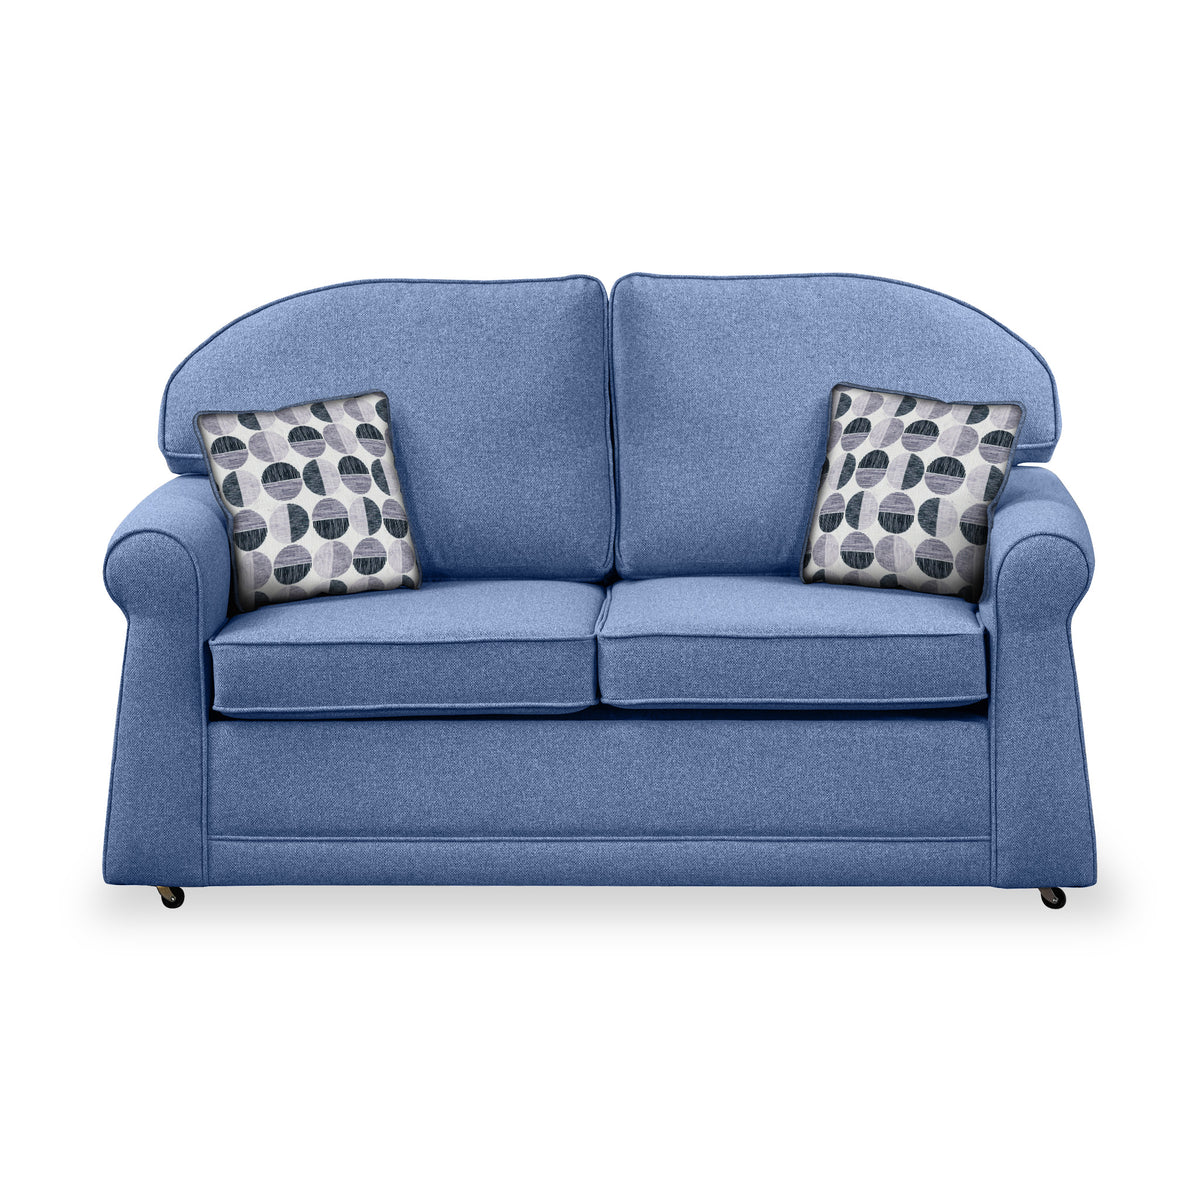 Croxdon Denim Faux Linen 2 Seater Sofabed with Mono Scatter Cushions from Roseland Furniture